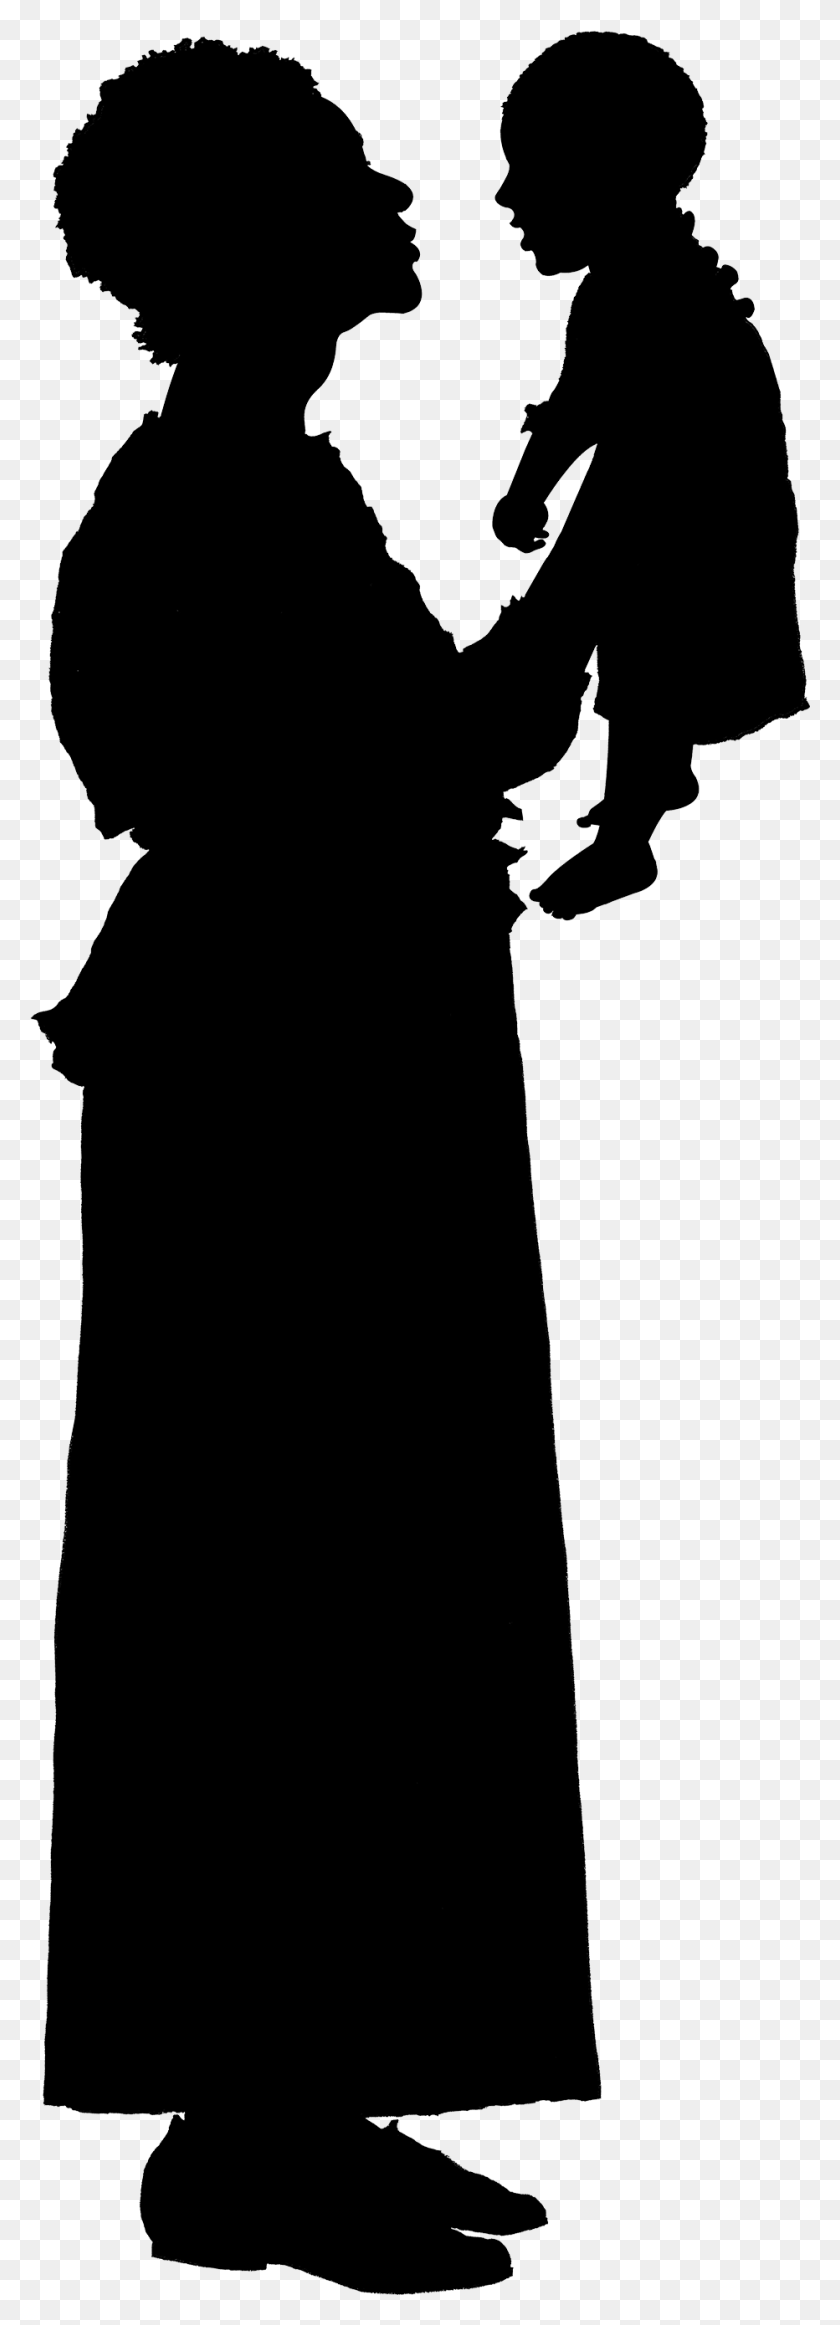 932x2707 These Silhouettes Are Meant To Represent People In Slave Silhouette, Person, Human, Clothing Descargar Hd Png